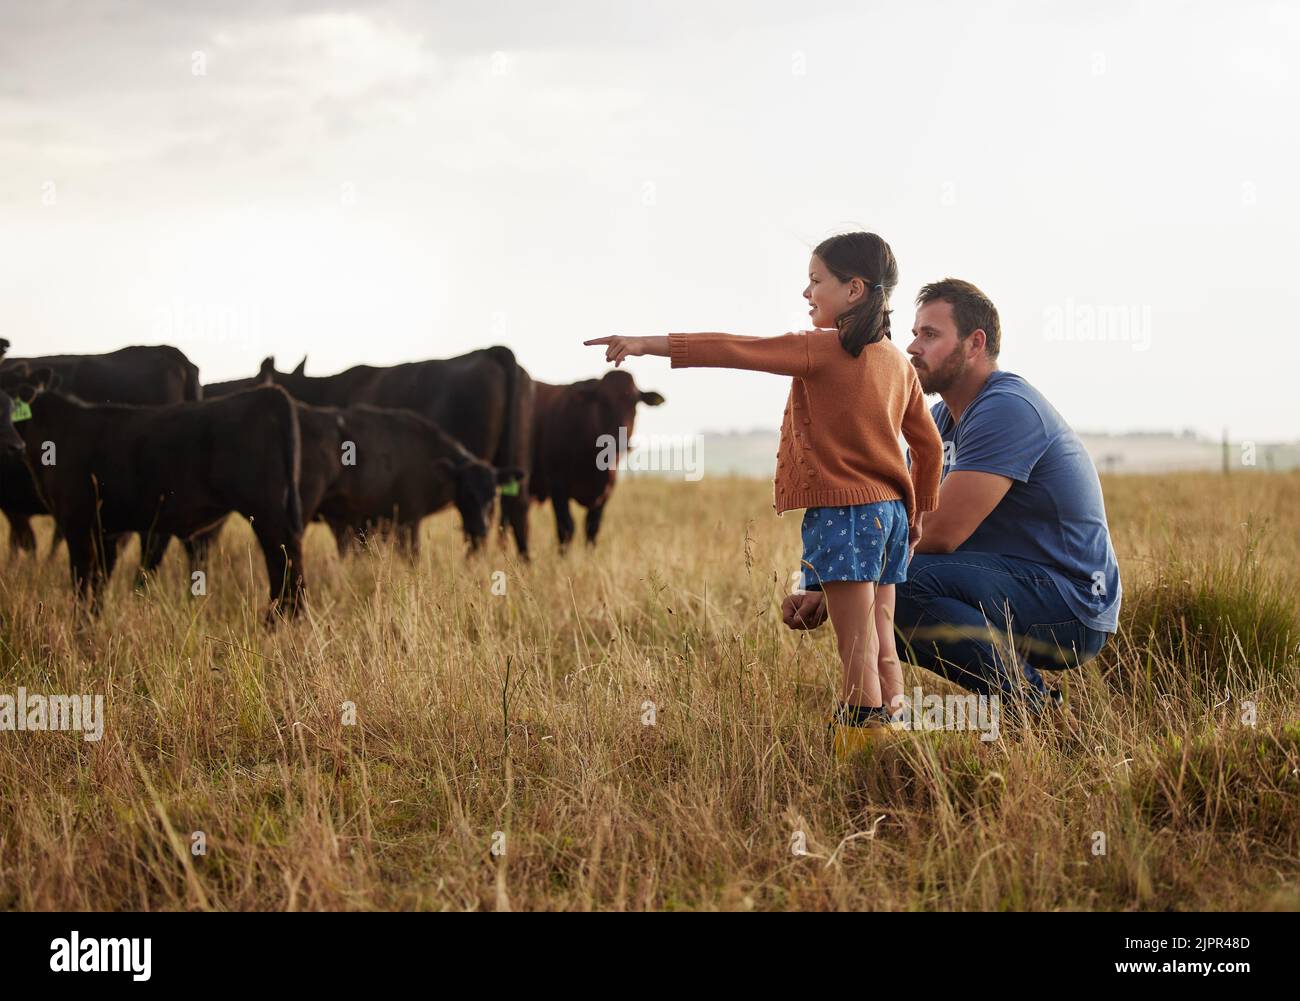 Family, dairy farming and farmer with child, daughter and girl pointing, showing and watching cows or cattle. Father and curious kid bonding on farm Stock Photo